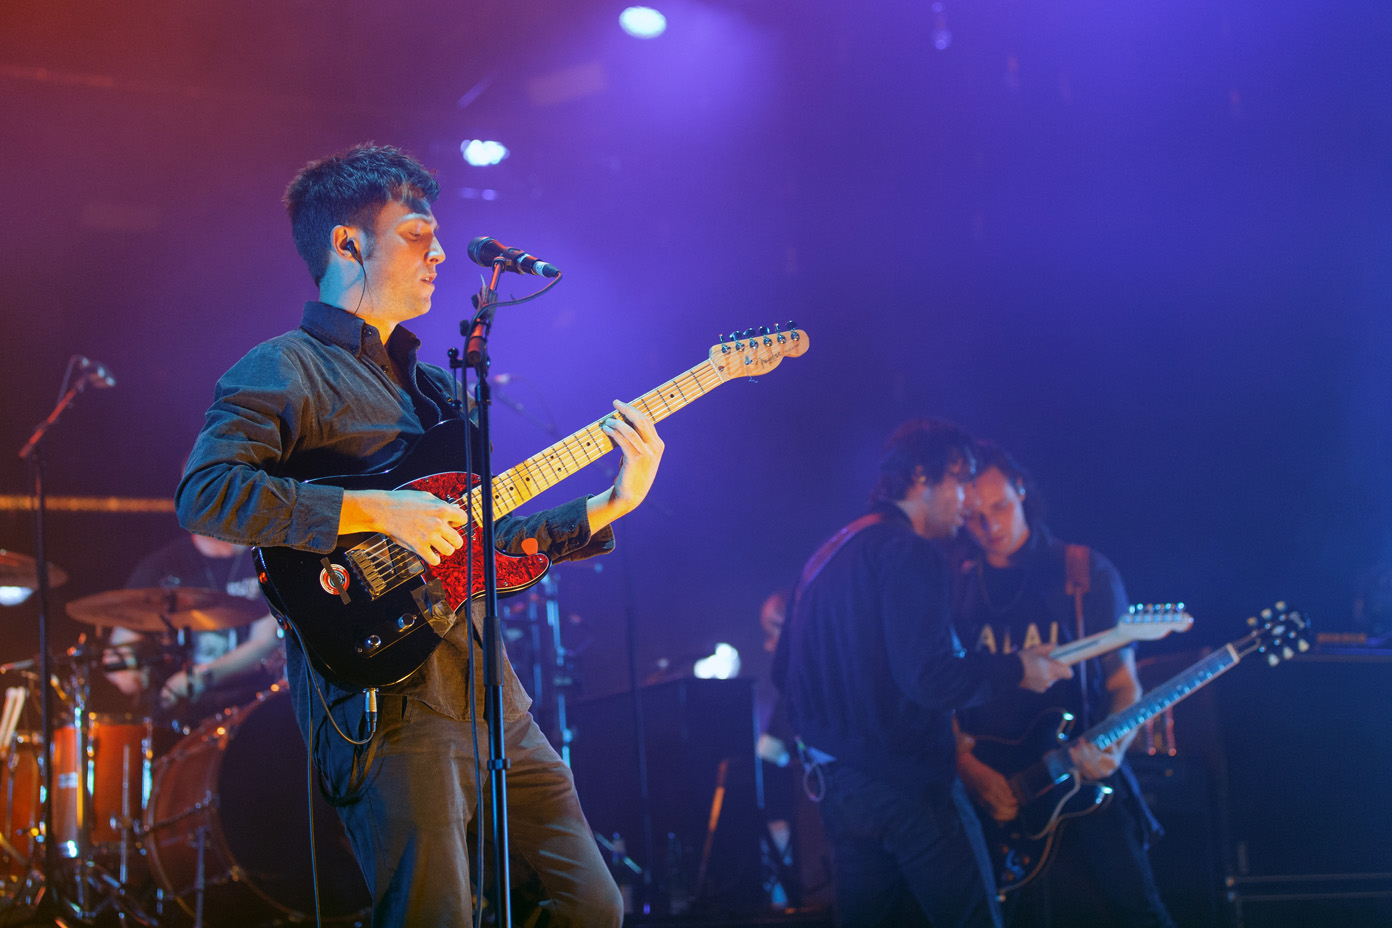 The Maccabees on stage at the O2 Apollo Manchester on 27 June 2017 during their farewell tour. Photo: Katy